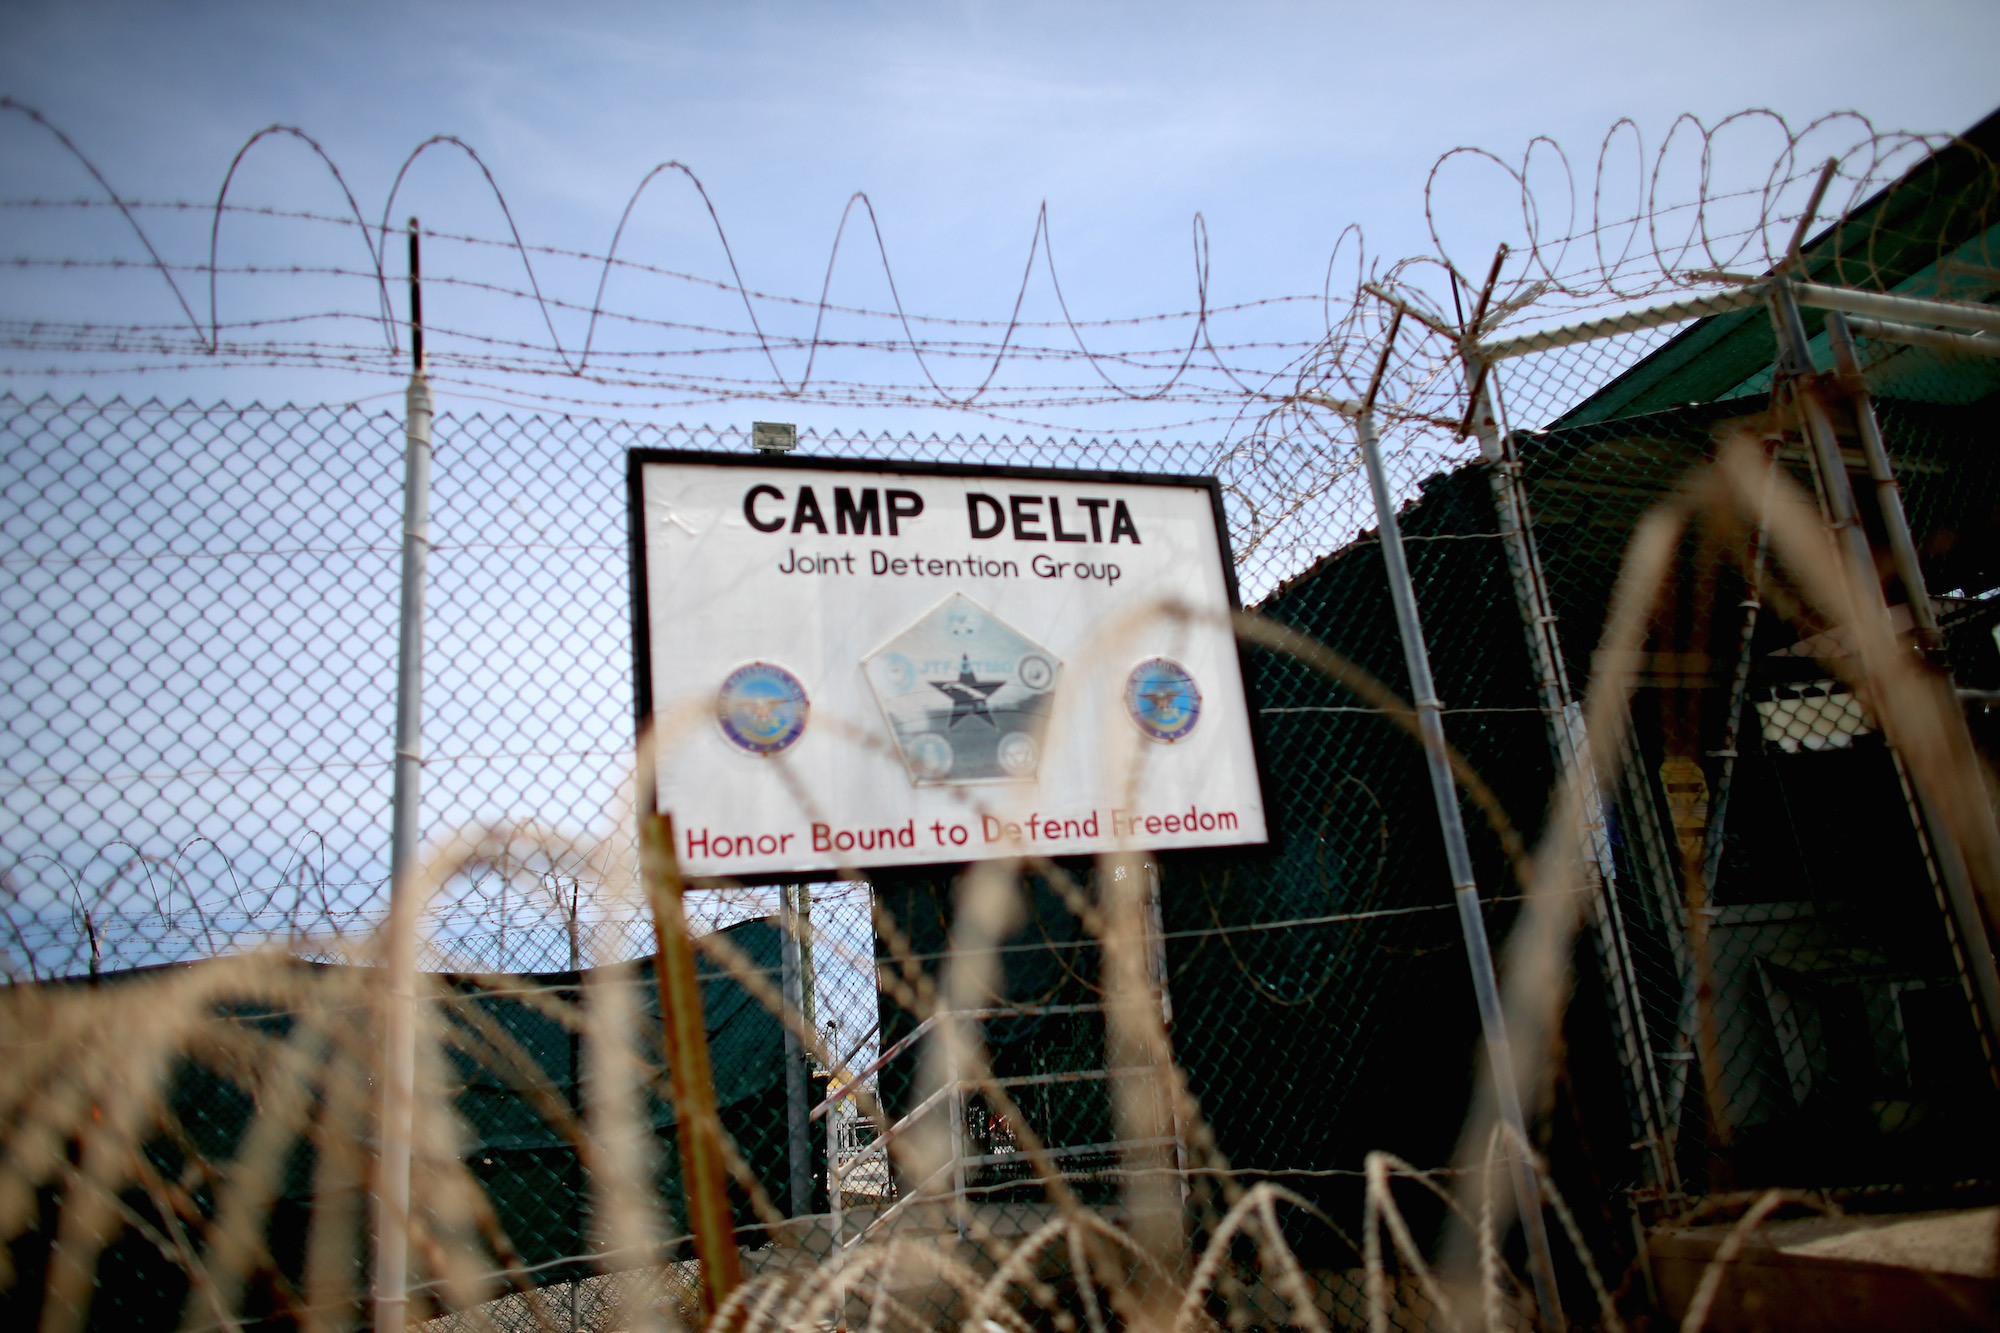 A sign stands in front of Camp Delta which is part of the U.S. military prison for 'enemy combatants' on June 25, 2013 in Guantanamo Bay, Cuba. Joe Raedle/Getty Images